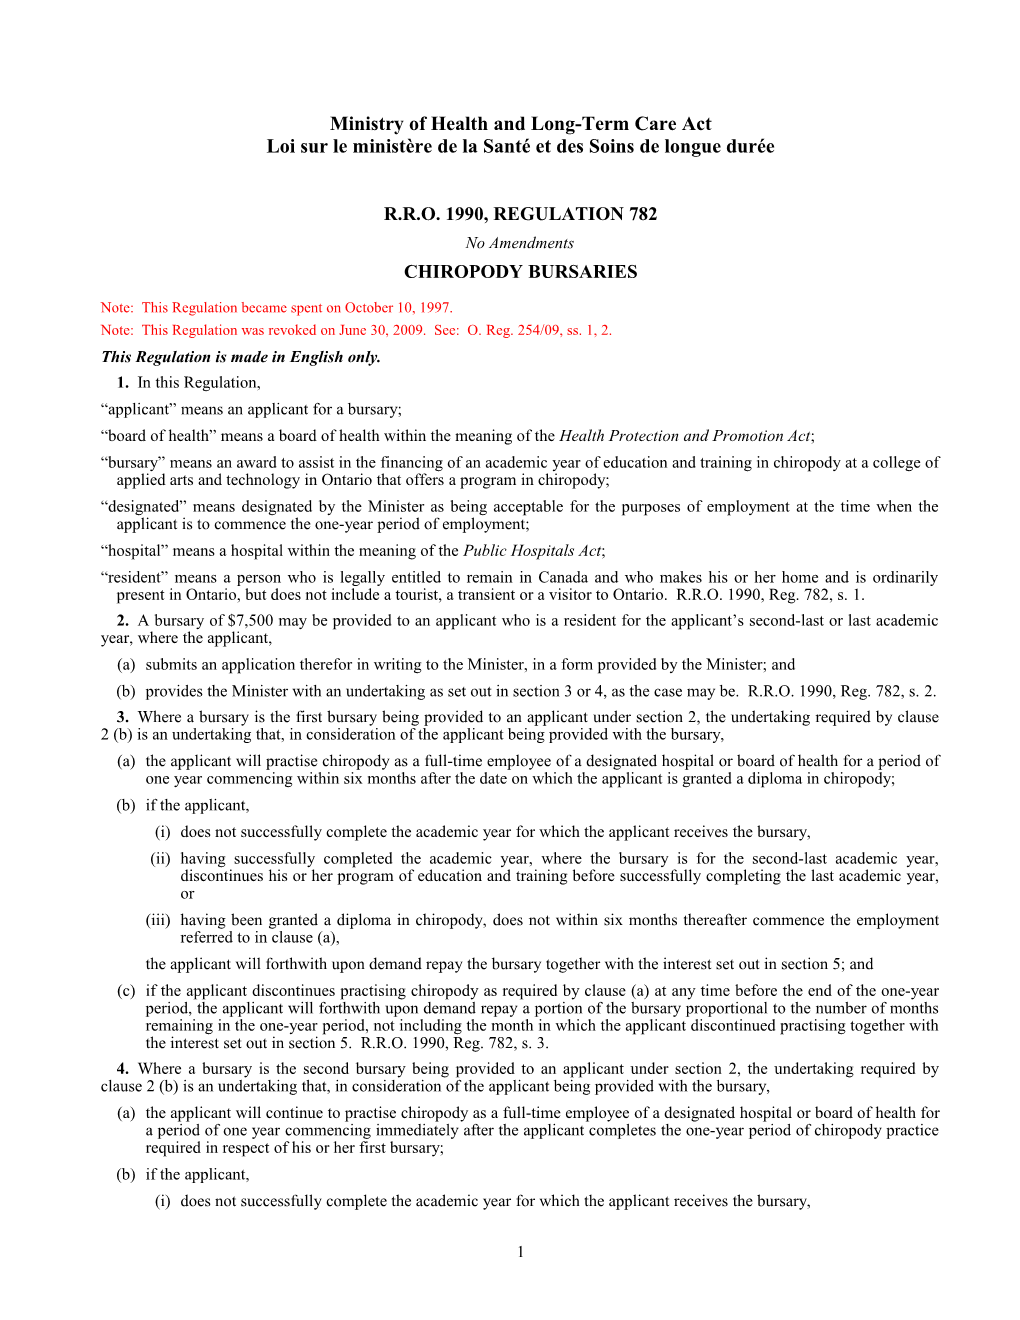 Ministry of Health and Long-Term Care Act - R.R.O. 1990, Reg. 782